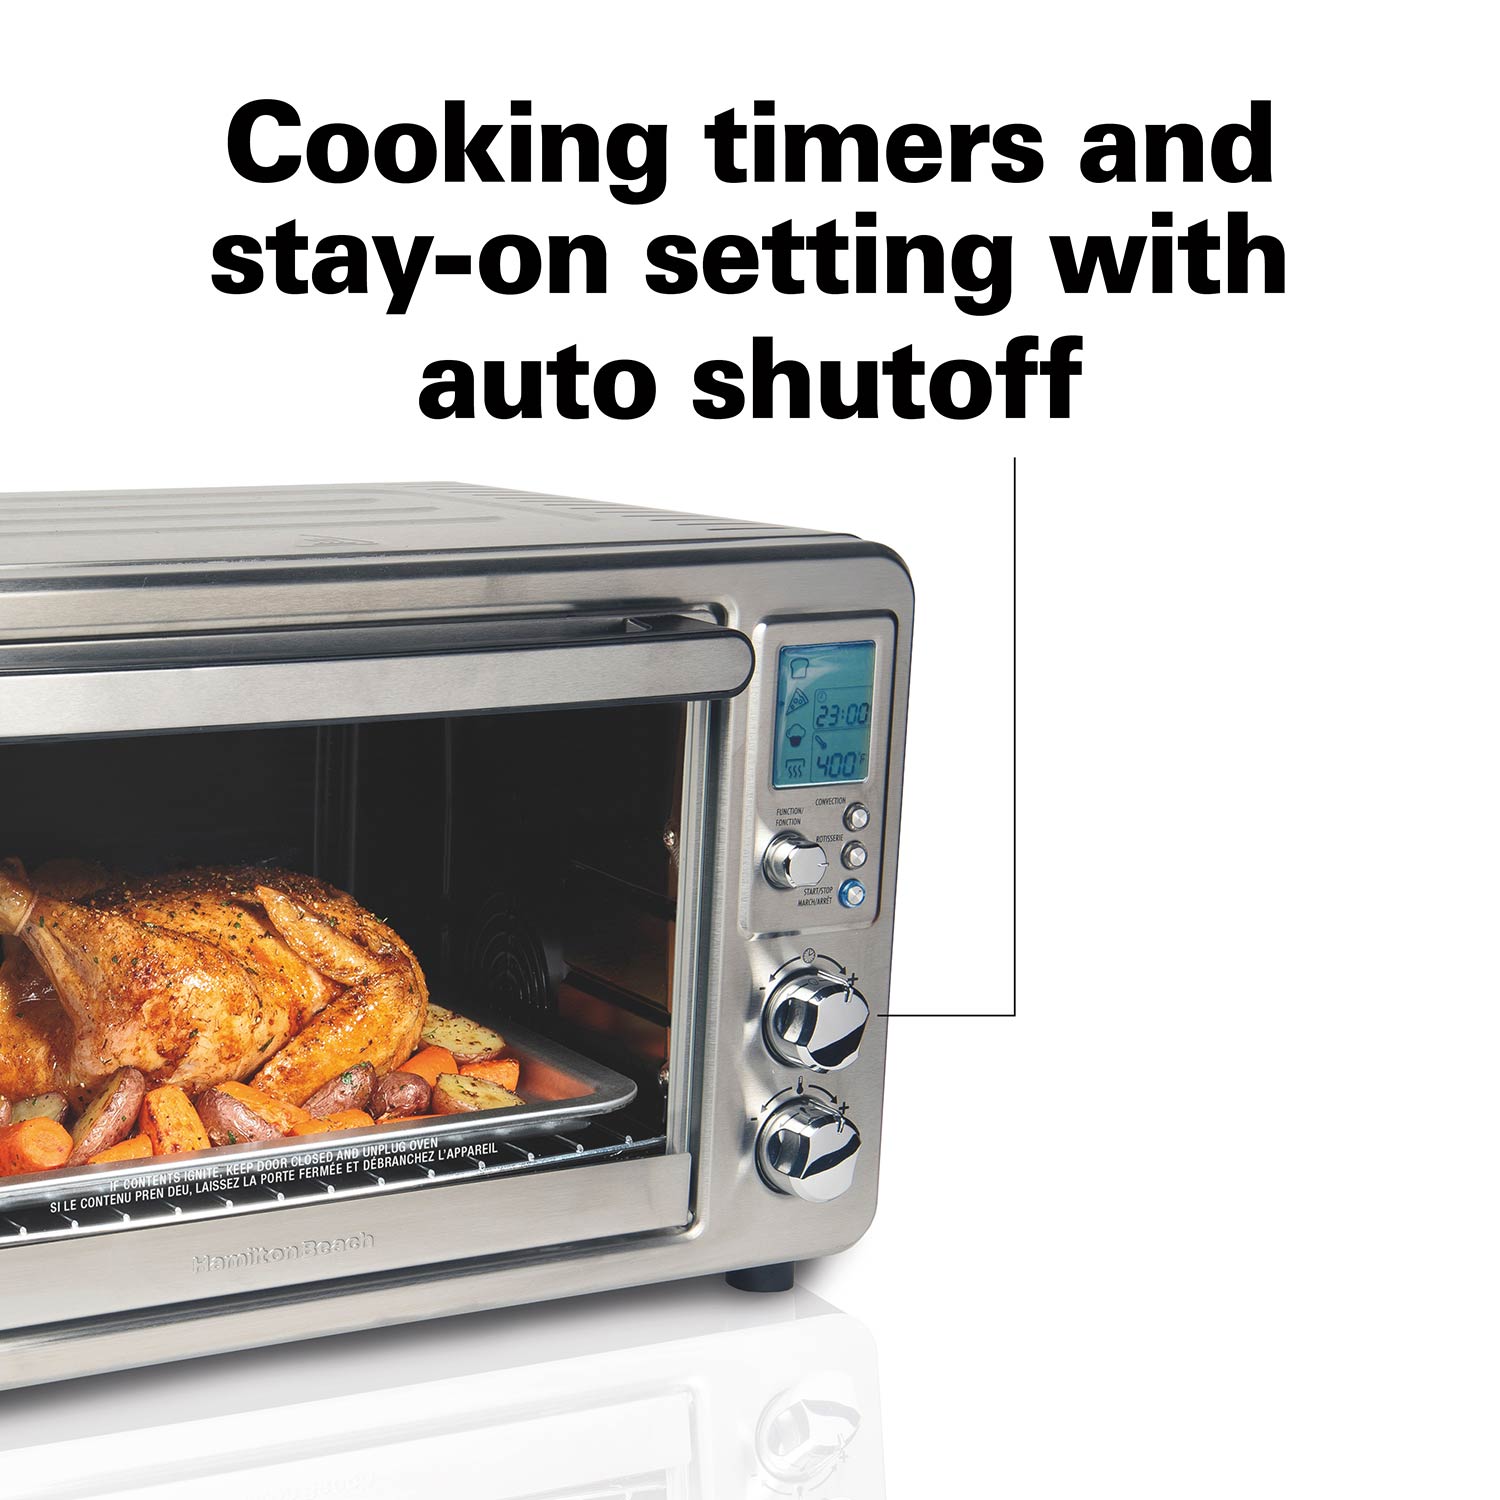 Win a Hamilton Beach Digital Air Fryer Toaster Oven with Rotisserie - Mom  Does Reviews